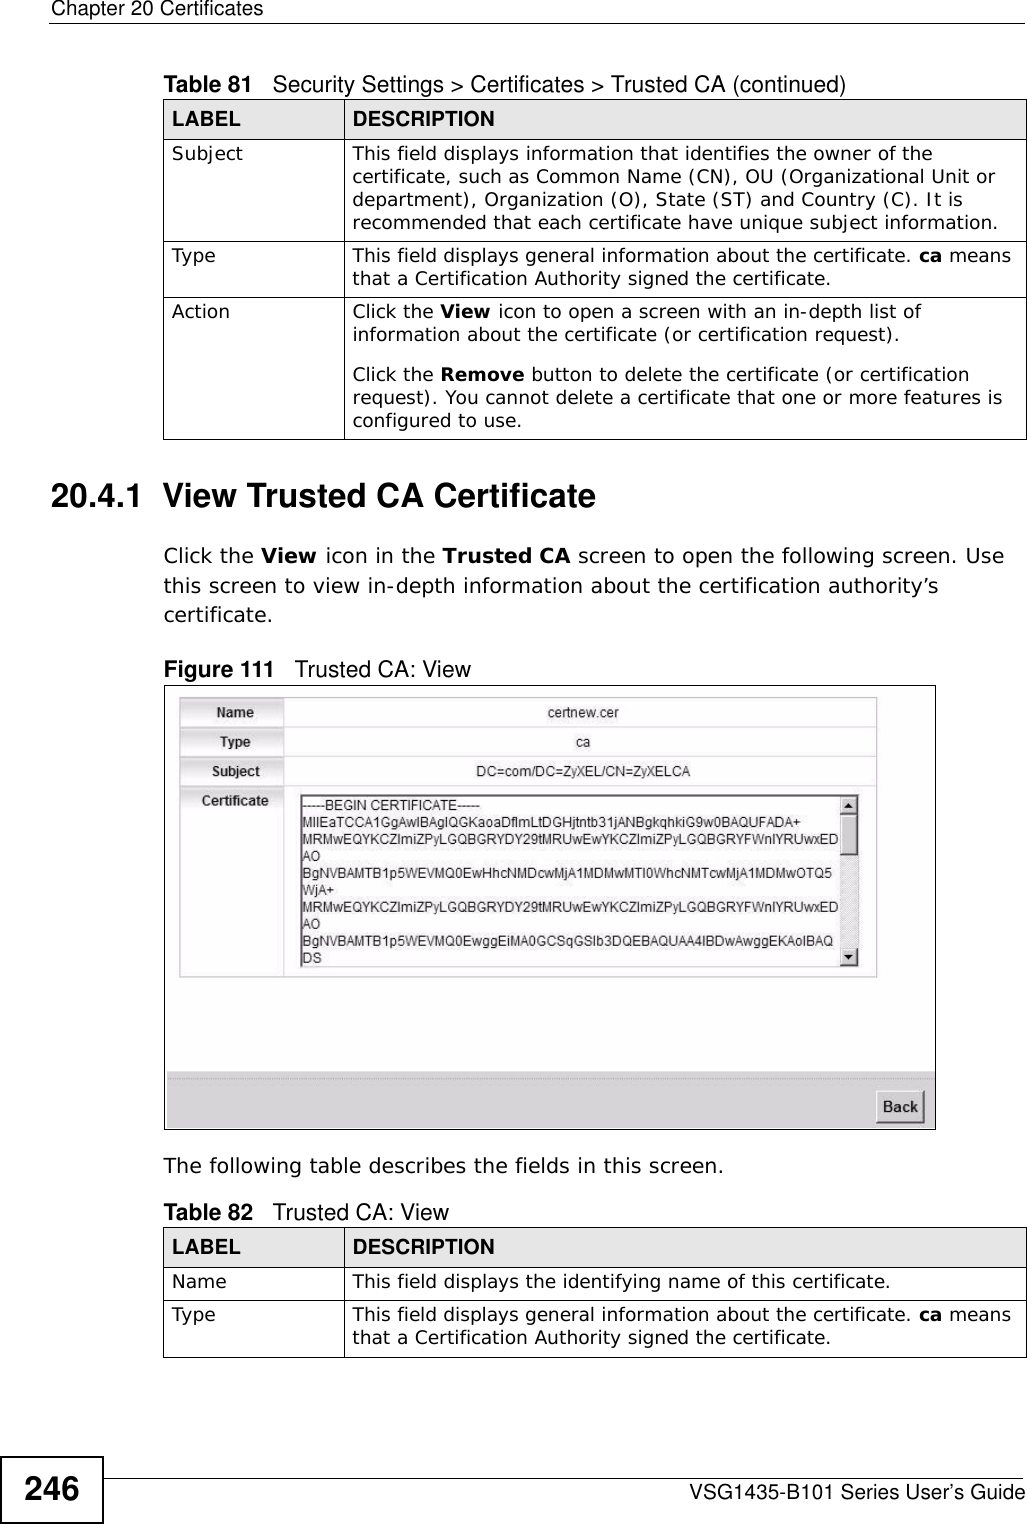 Chapter 20 CertificatesVSG1435-B101 Series User’s Guide24620.4.1  View Trusted CA CertificateClick the View icon in the Trusted CA screen to open the following screen. Use this screen to view in-depth information about the certification authority’s certificate.Figure 111   Trusted CA: View The following table describes the fields in this screen. Subject This field displays information that identifies the owner of the certificate, such as Common Name (CN), OU (Organizational Unit or department), Organization (O), State (ST) and Country (C). It is recommended that each certificate have unique subject information.Type This field displays general information about the certificate. ca means that a Certification Authority signed the certificate. Action Click the View icon to open a screen with an in-depth list of information about the certificate (or certification request).Click the Remove button to delete the certificate (or certification request). You cannot delete a certificate that one or more features is configured to use.Table 81   Security Settings &gt; Certificates &gt; Trusted CA (continued)LABEL DESCRIPTIONTable 82   Trusted CA: ViewLABEL DESCRIPTIONName This field displays the identifying name of this certificate. Type This field displays general information about the certificate. ca means that a Certification Authority signed the certificate. 